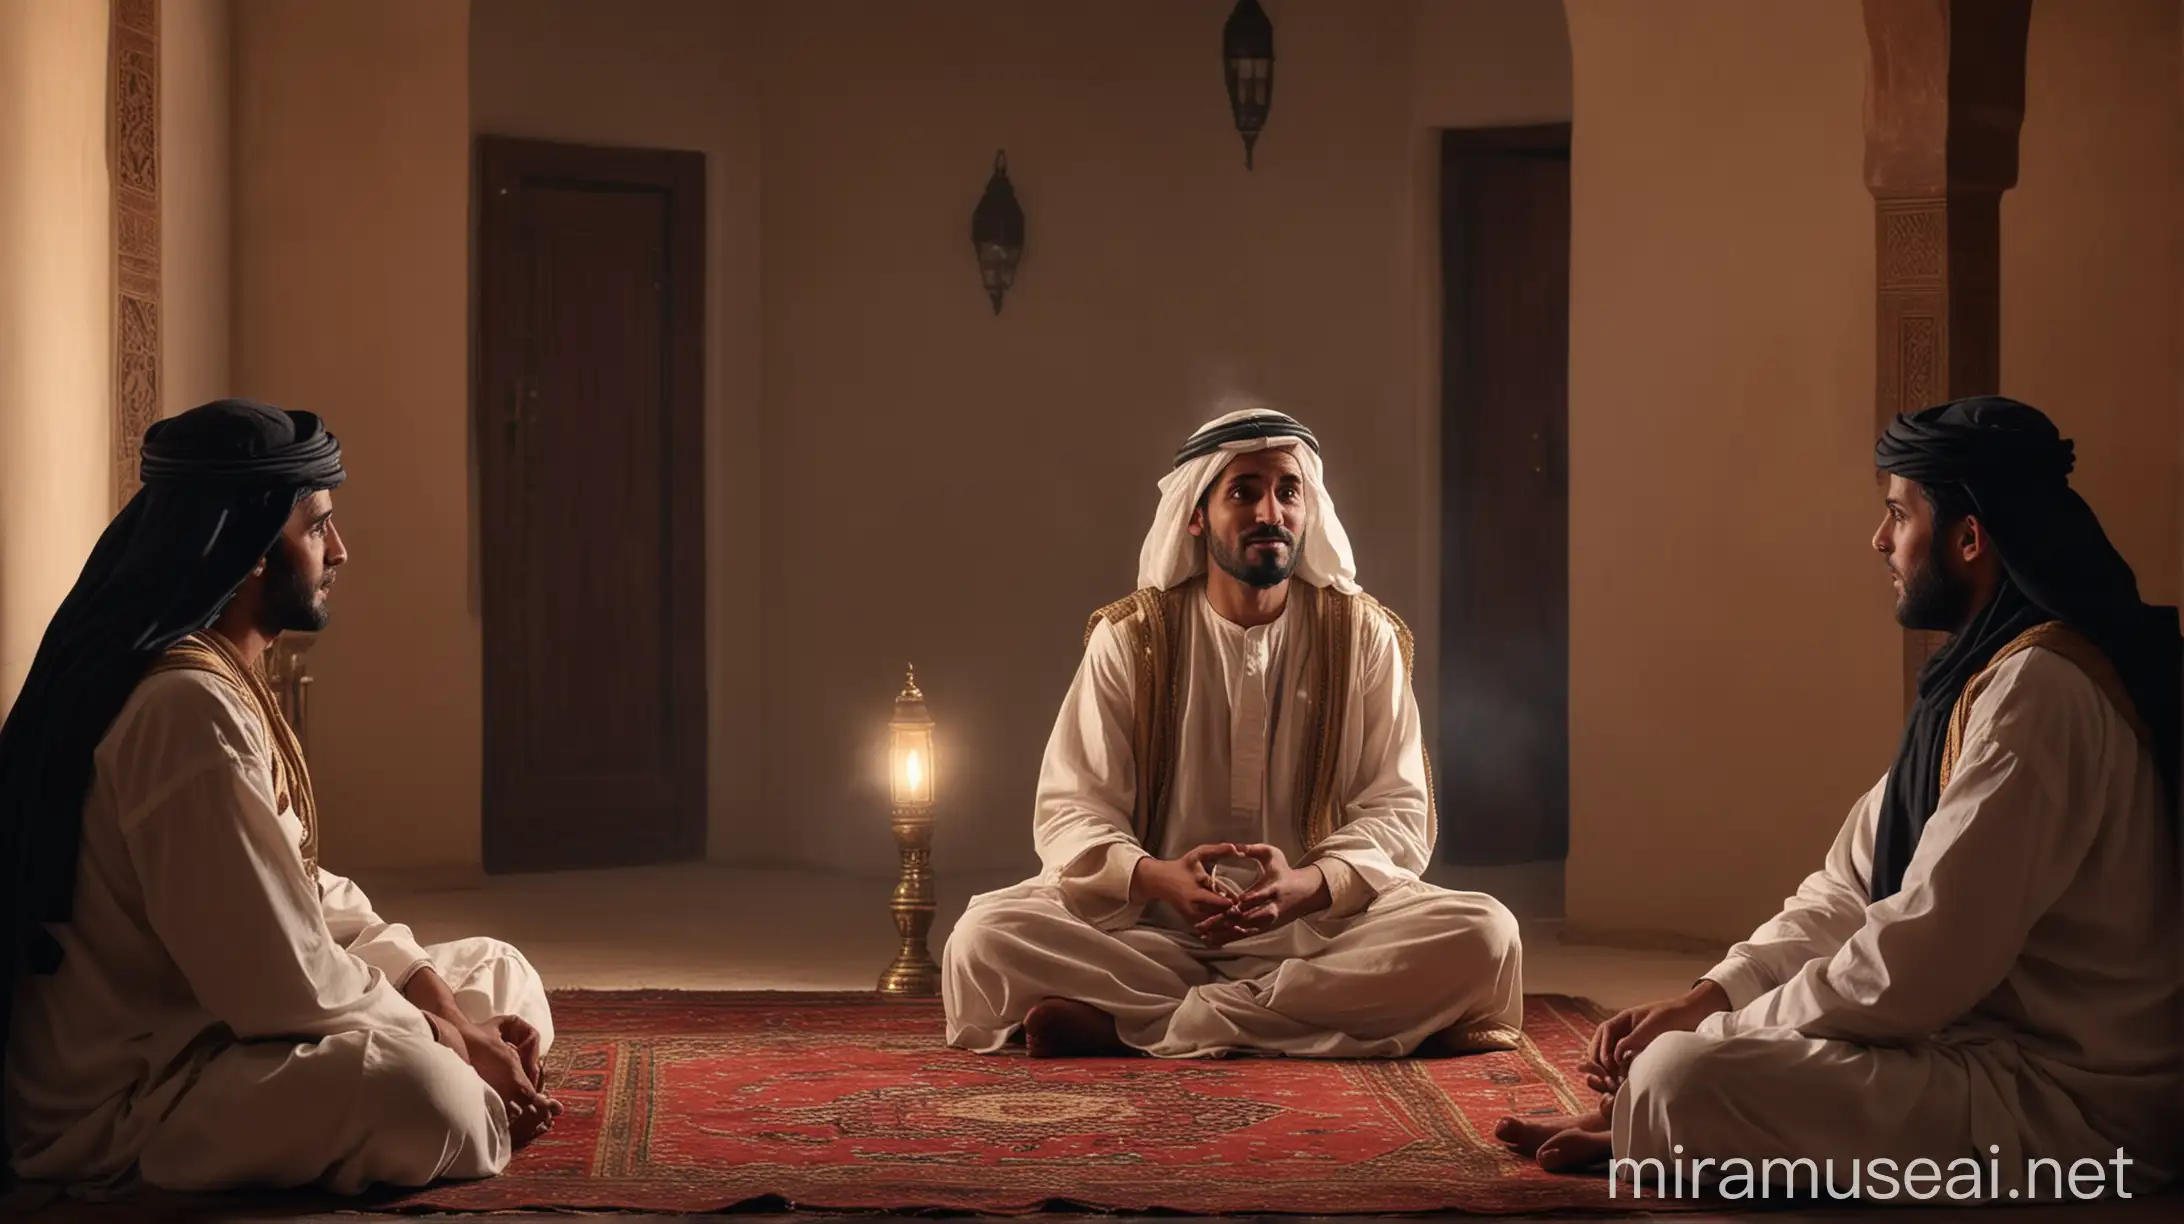 Ancient Arabian Man Narrating a Tale to Friends in Candlelit Chamber